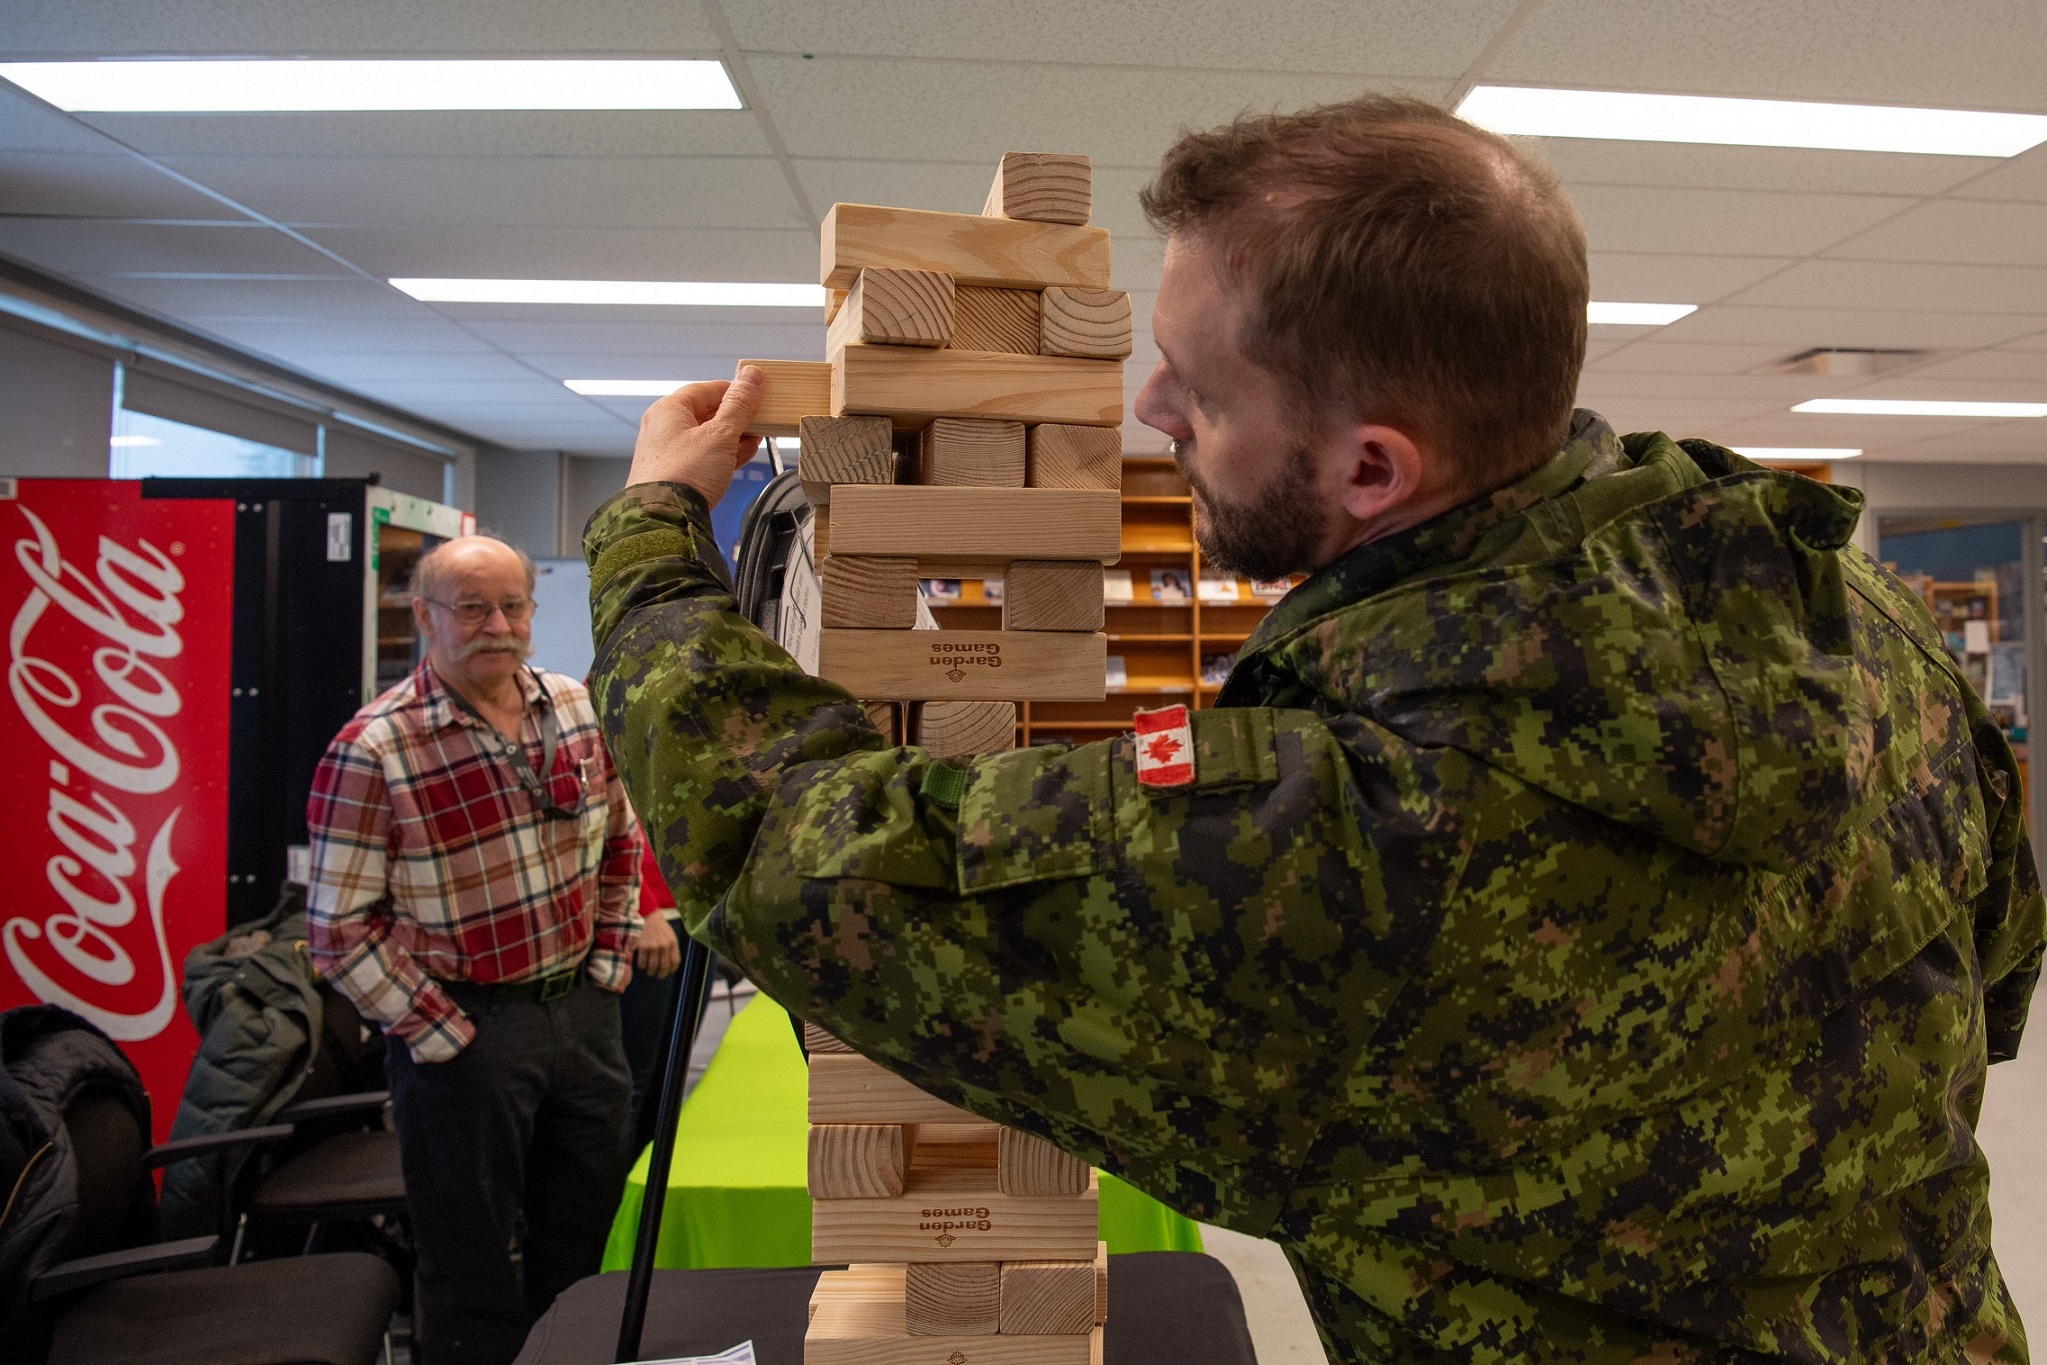 Canadian Forces member playing the Jenga game, with Staff member watching in background